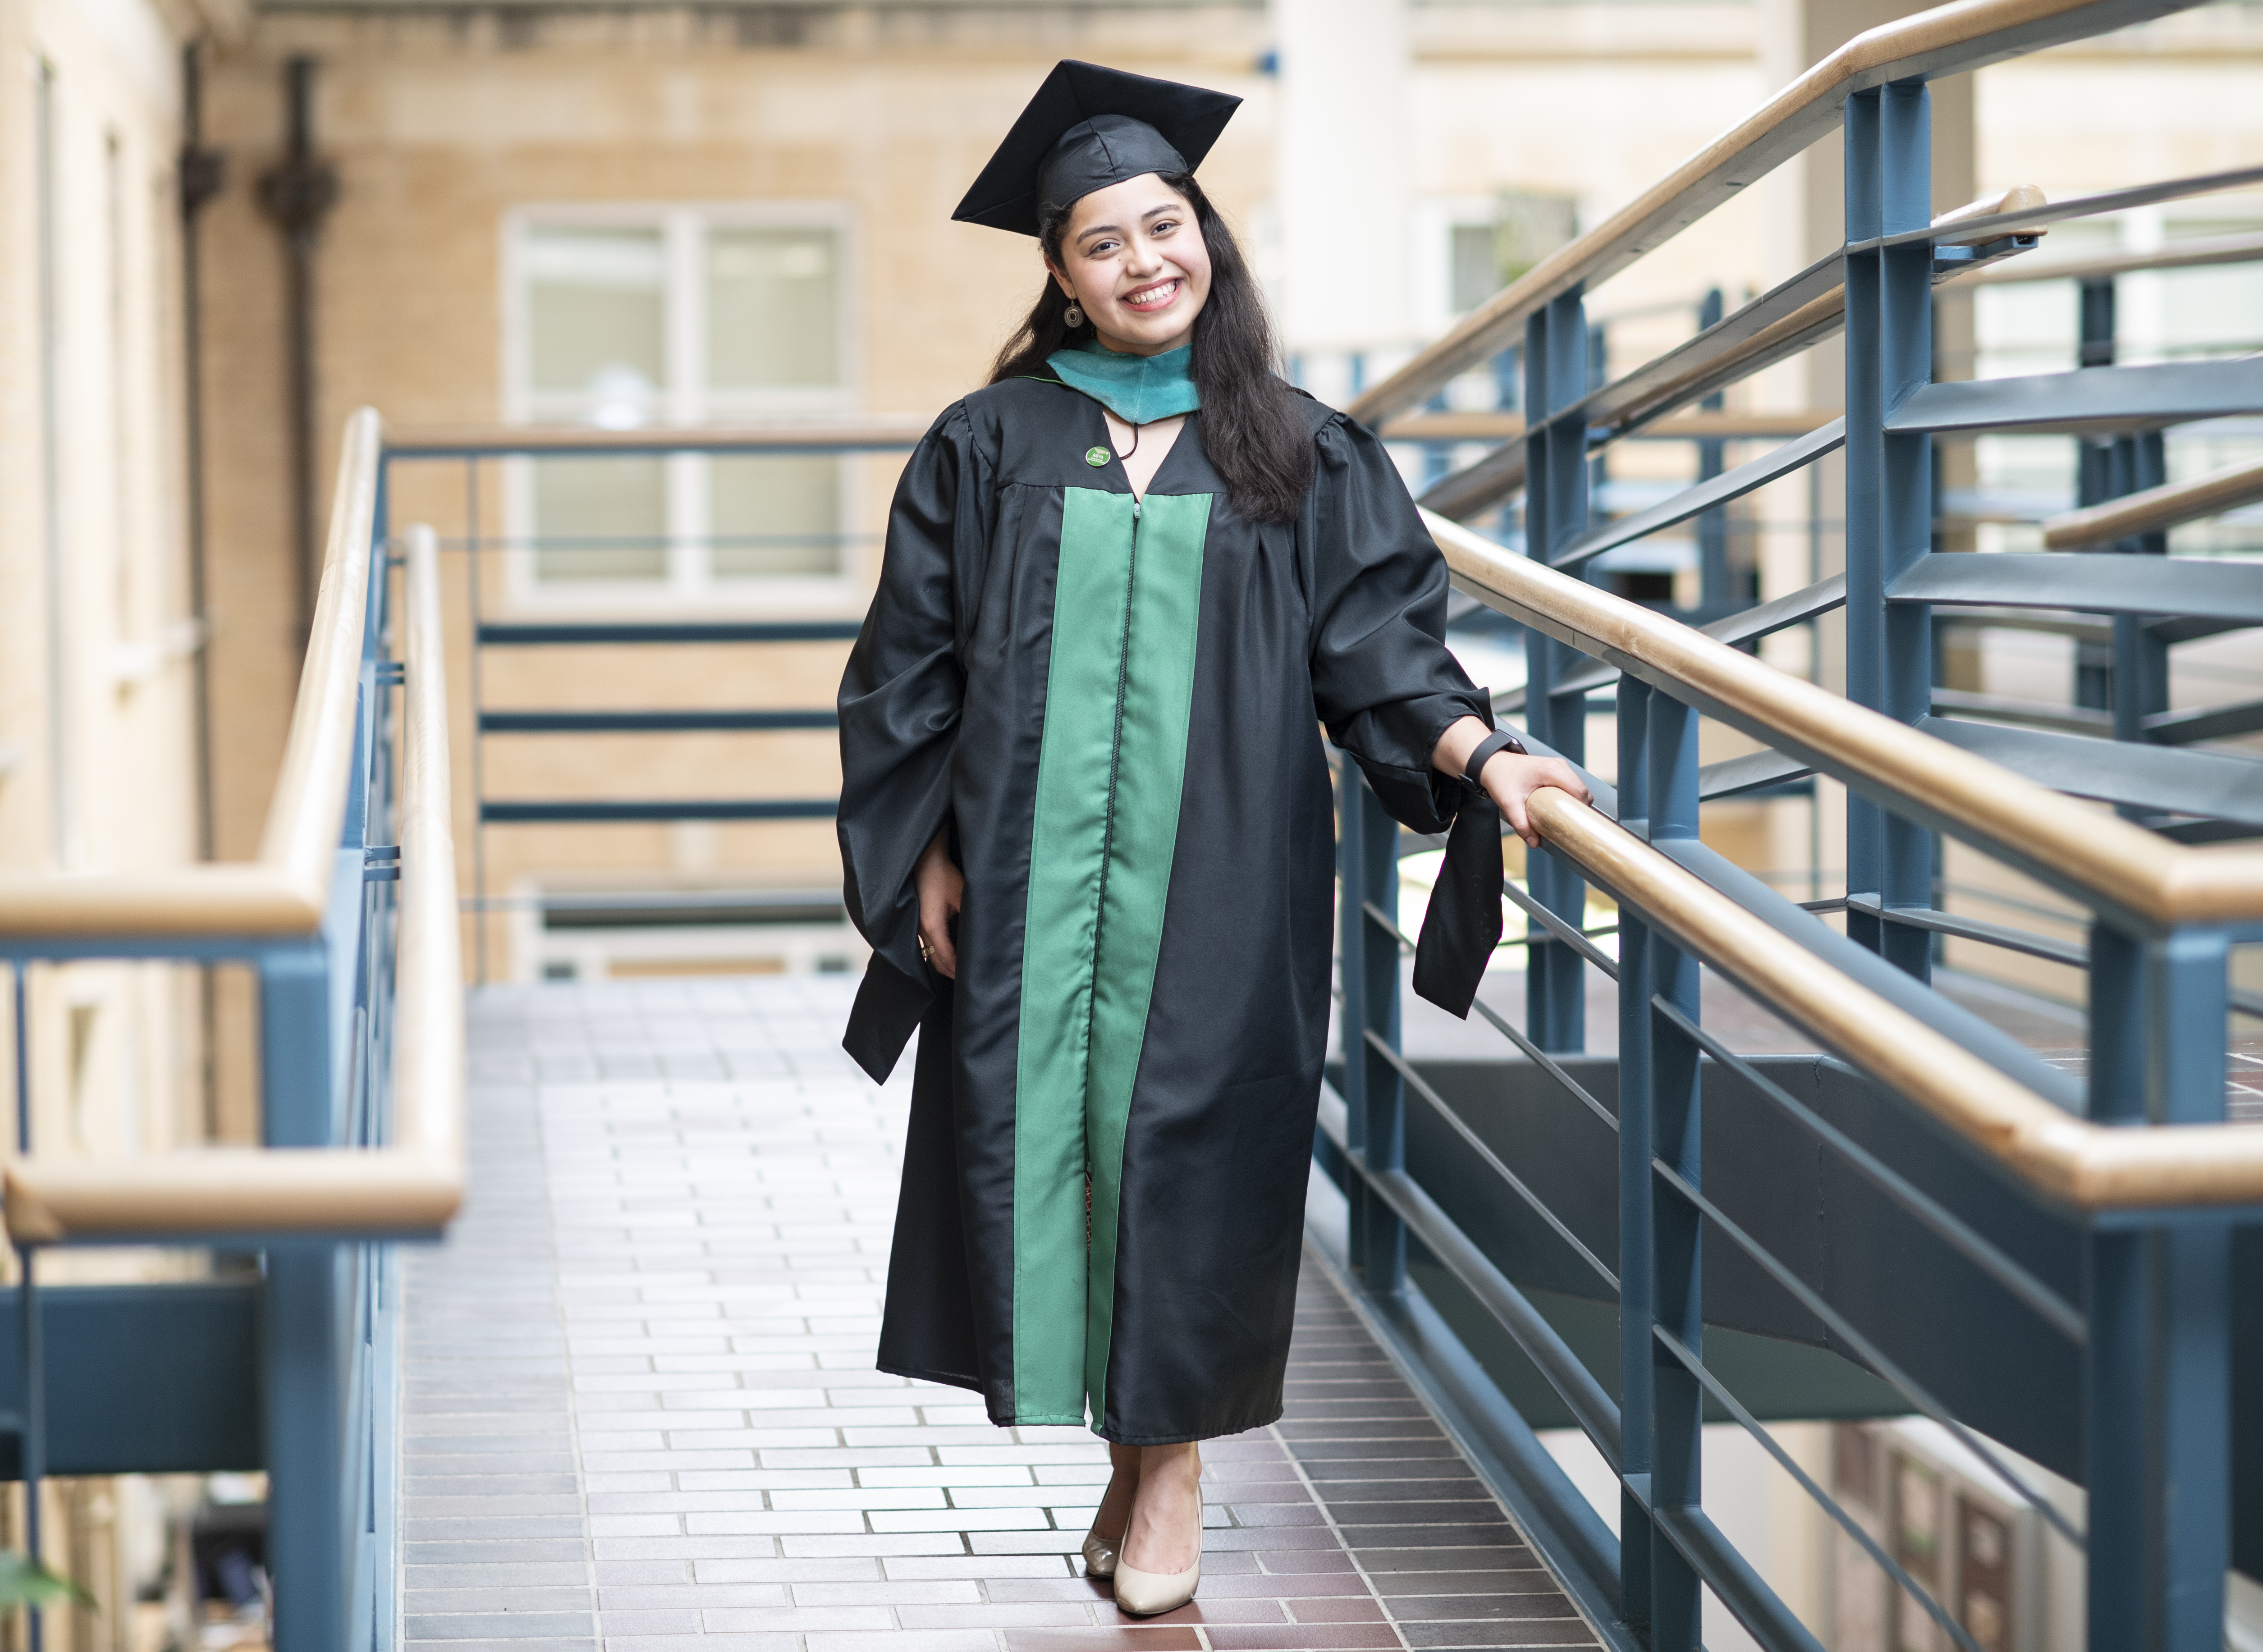 UNT student awarded grant to earn second master’s degree, work toward dream of global education foundation